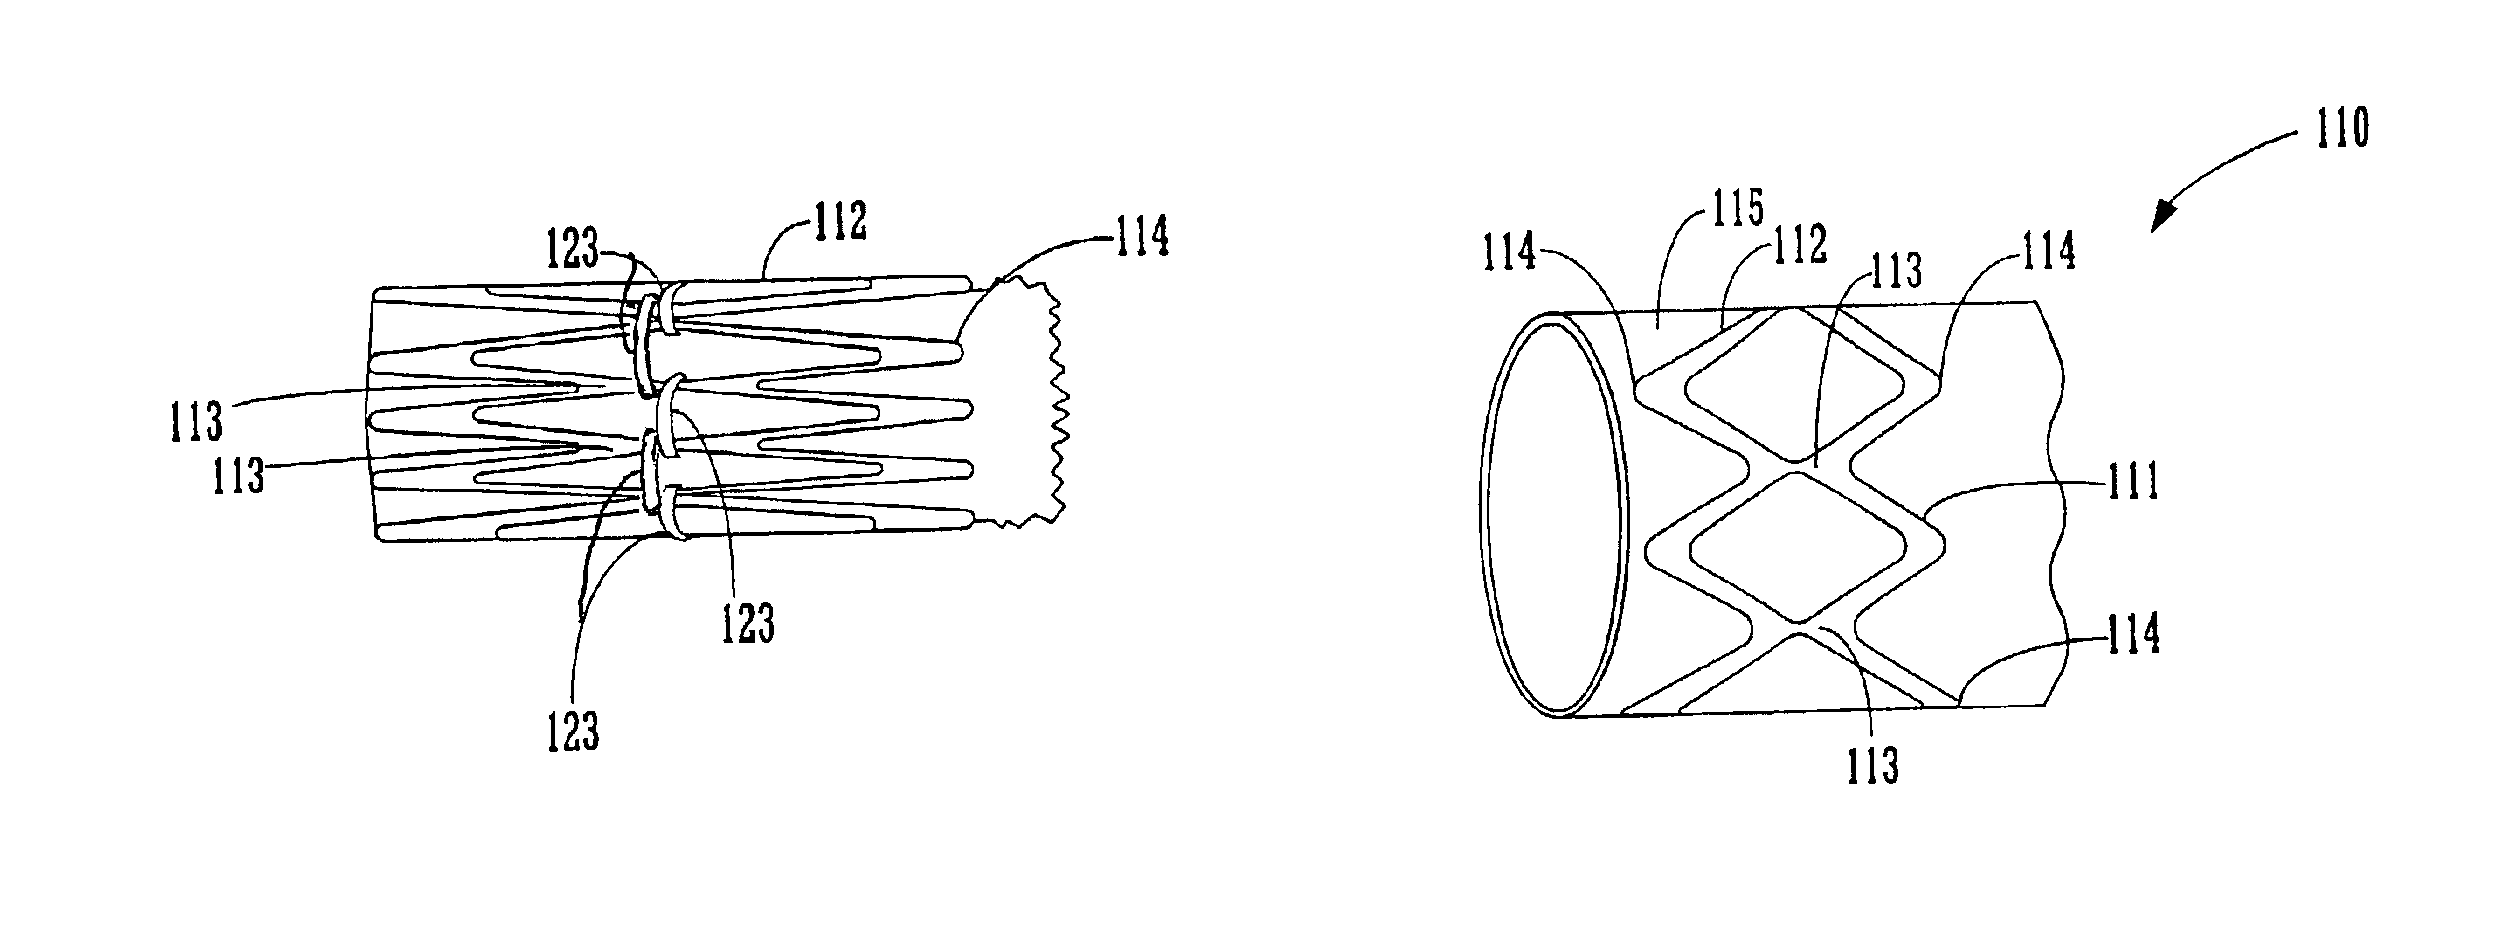 Stent graft loading and deployment device and method